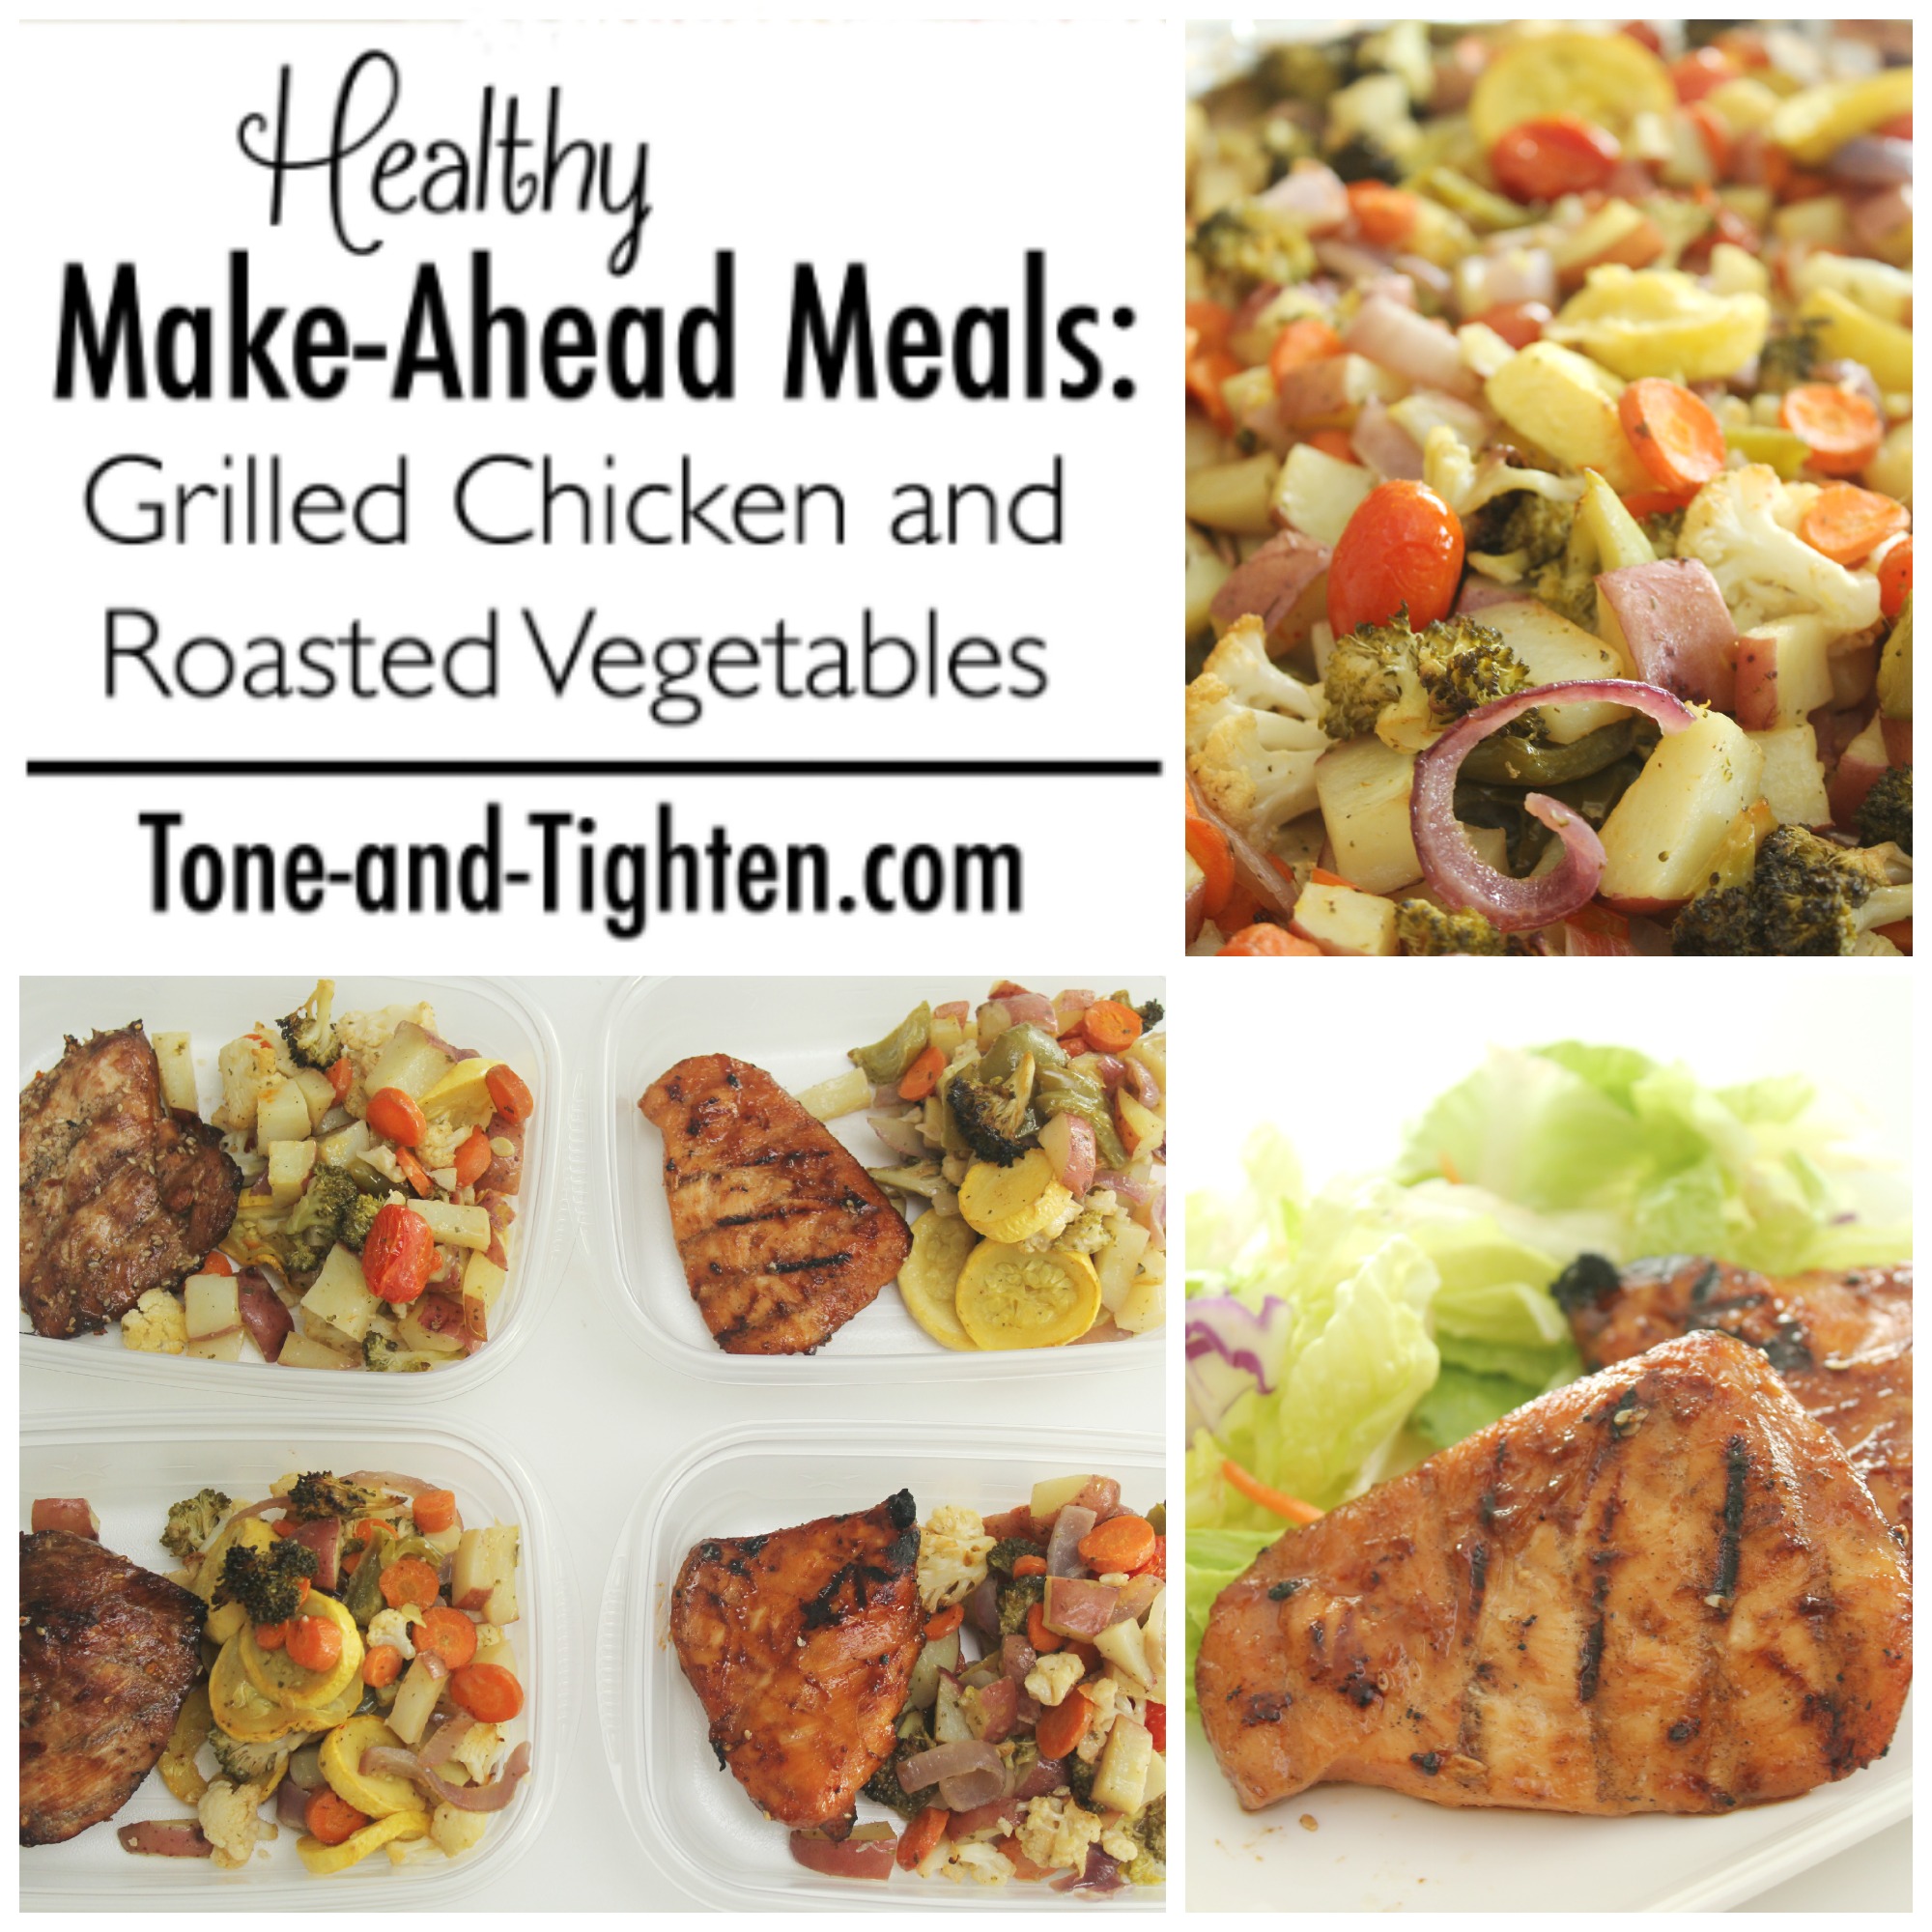 Healthy Make-Ahead Meals: Grilled Chicken and Roasted Vegetables